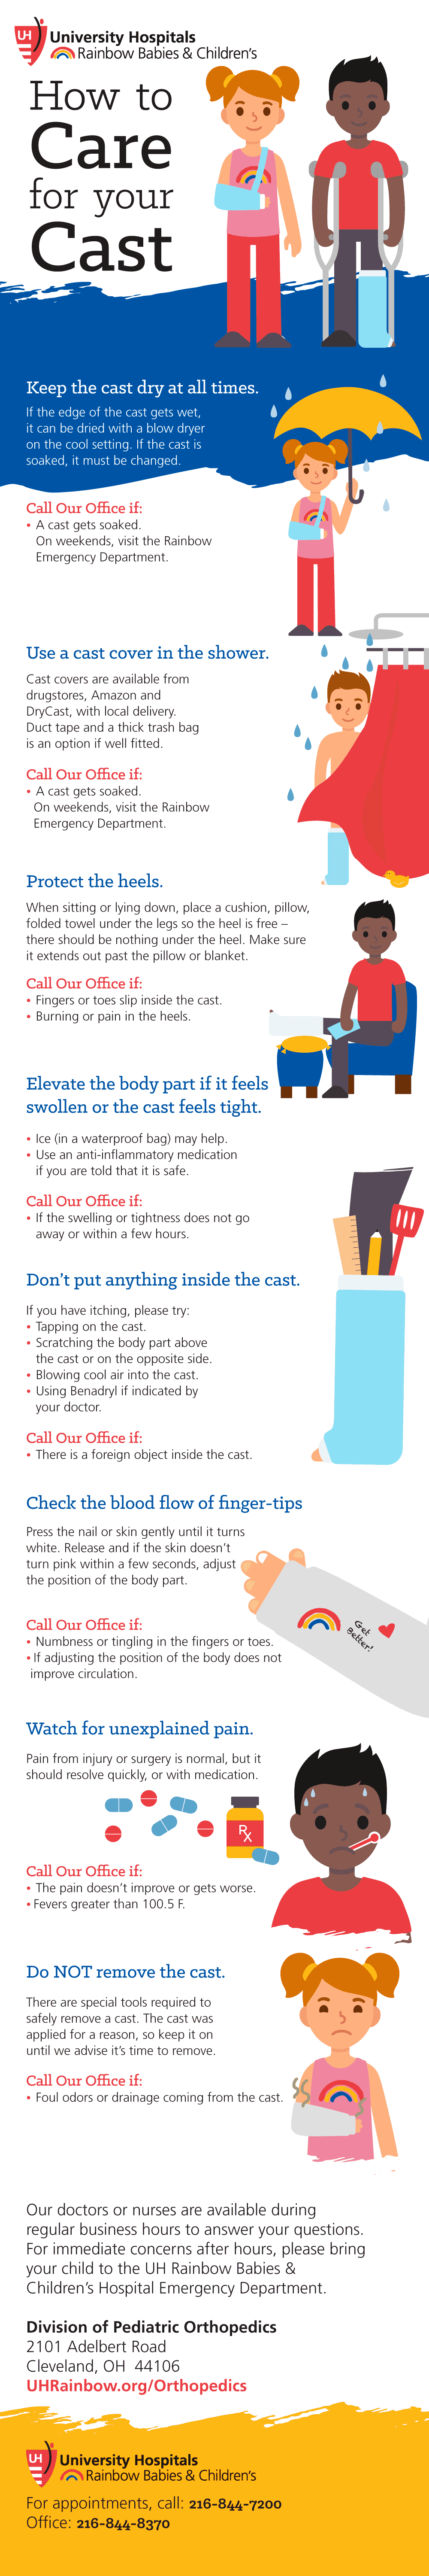 Infographic: How to Care for Your Cast